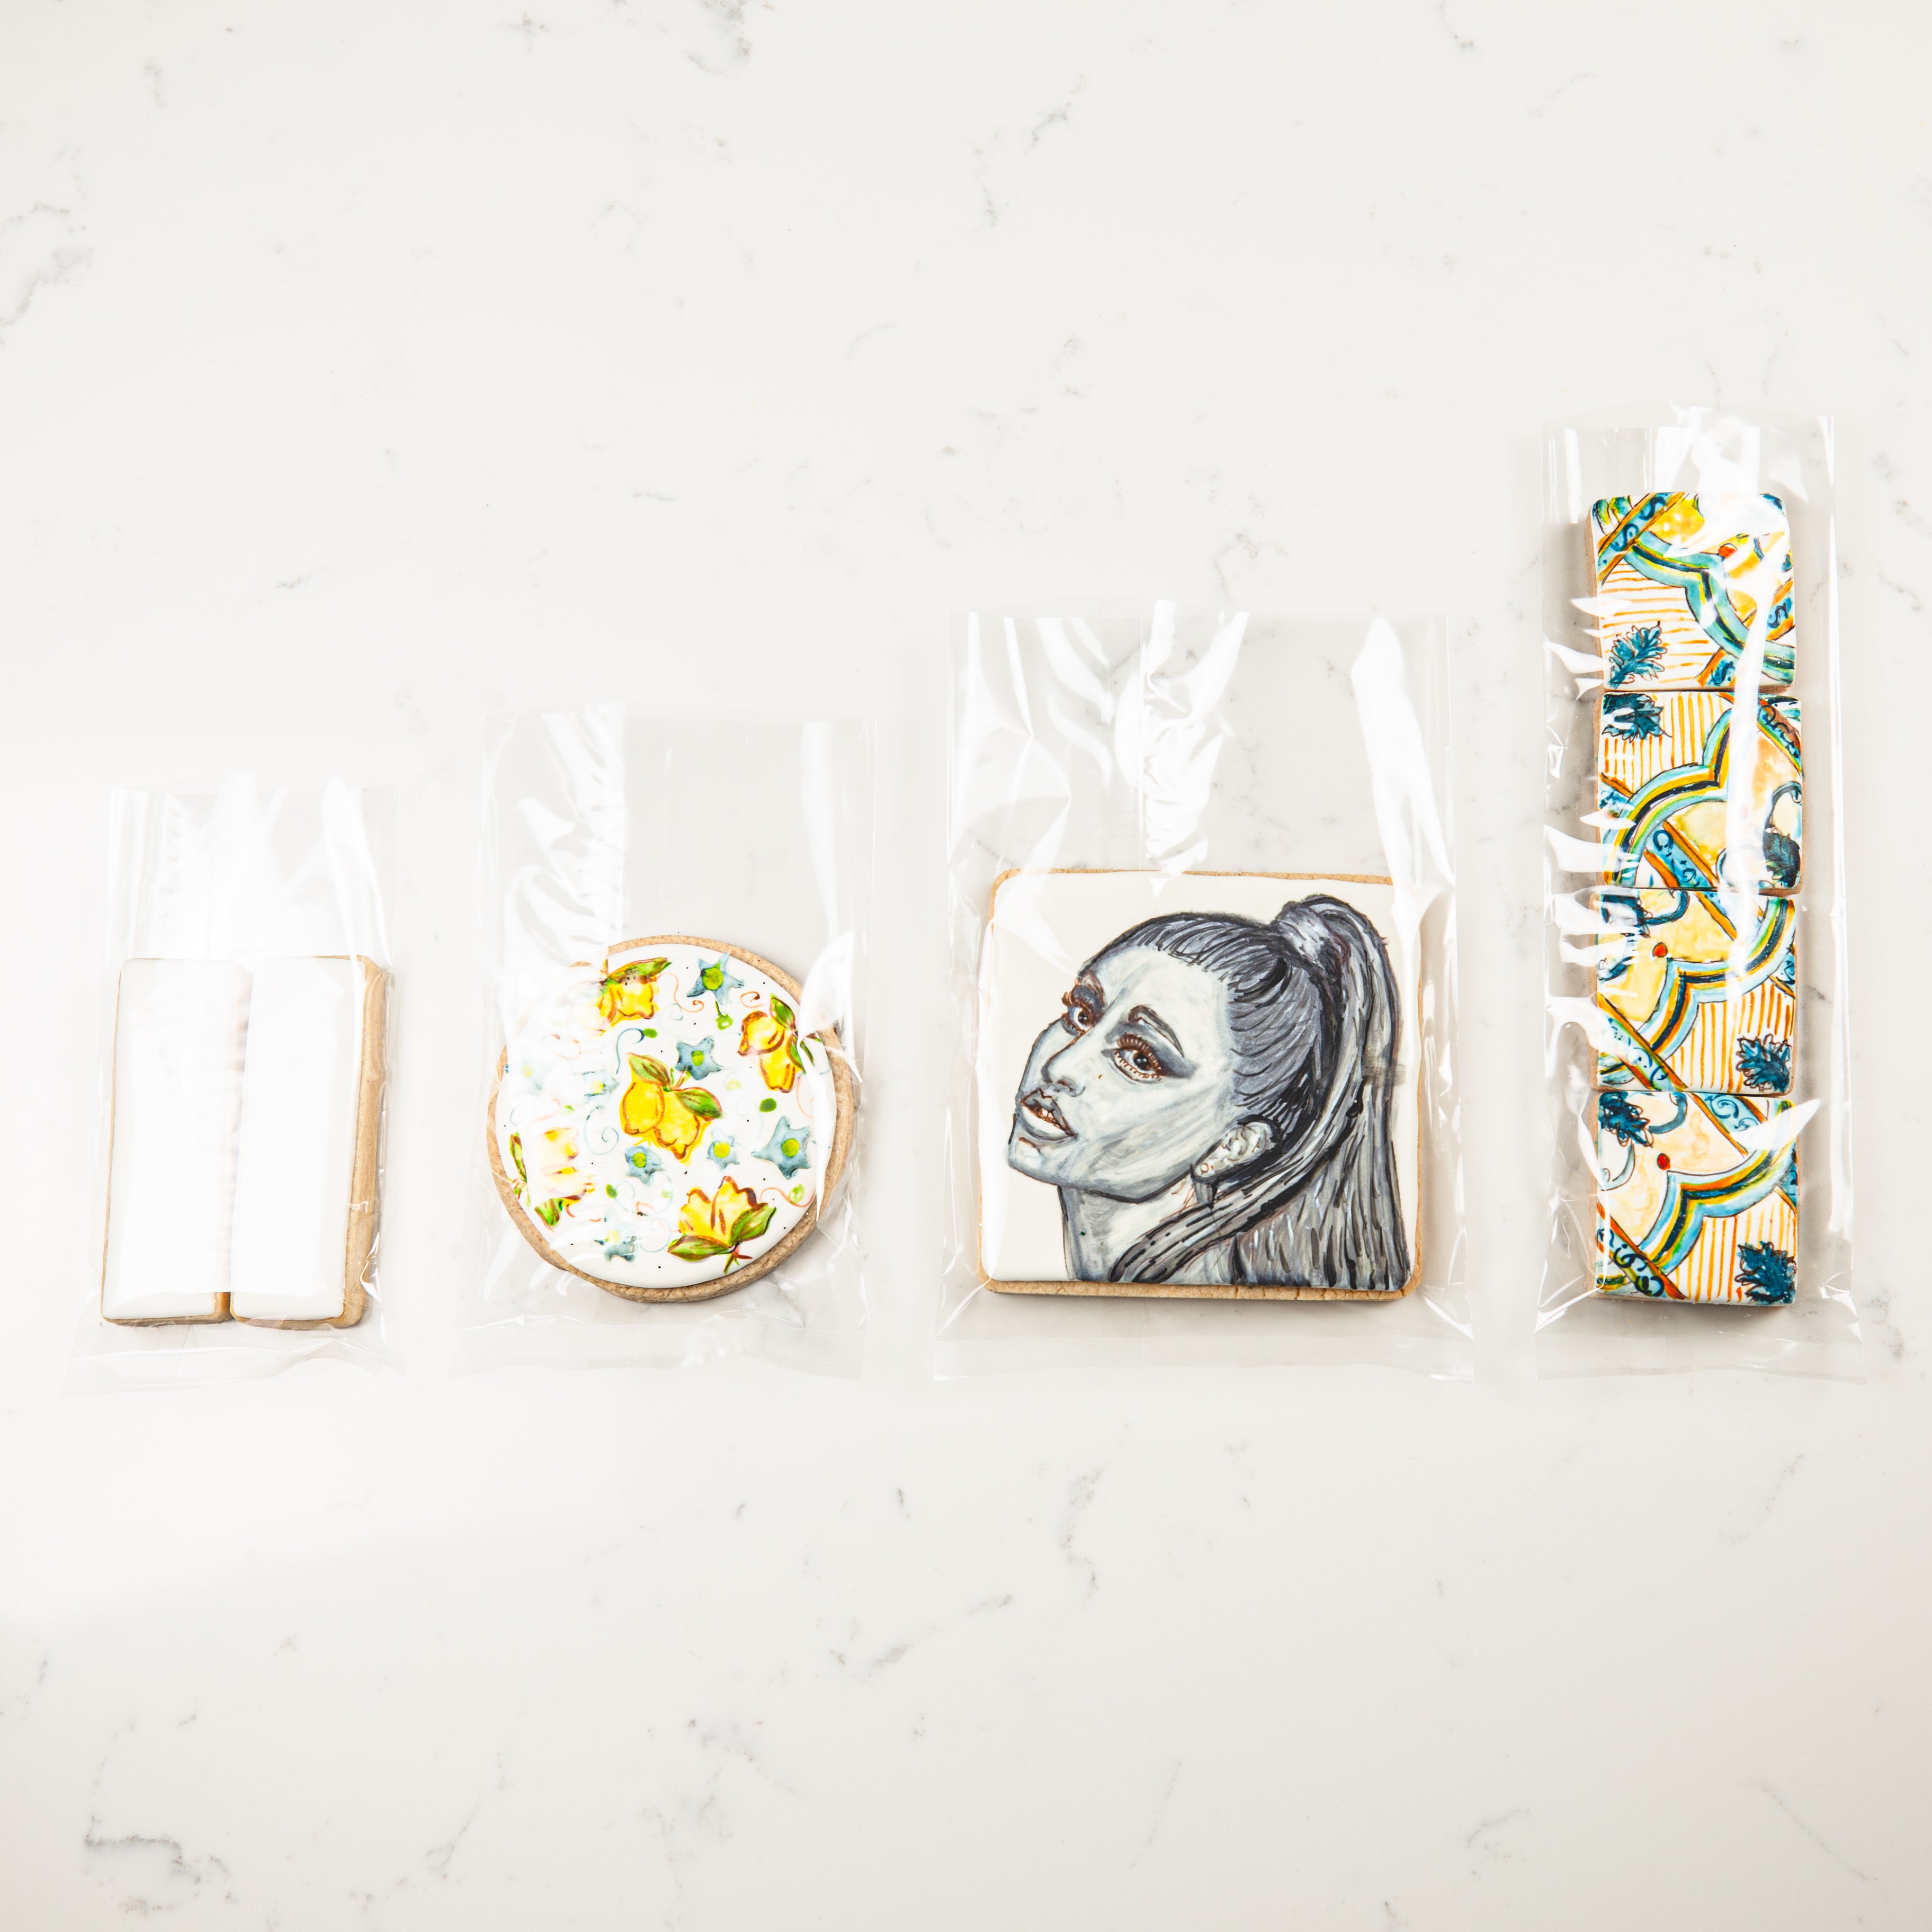 Different size Cello bags for cookies